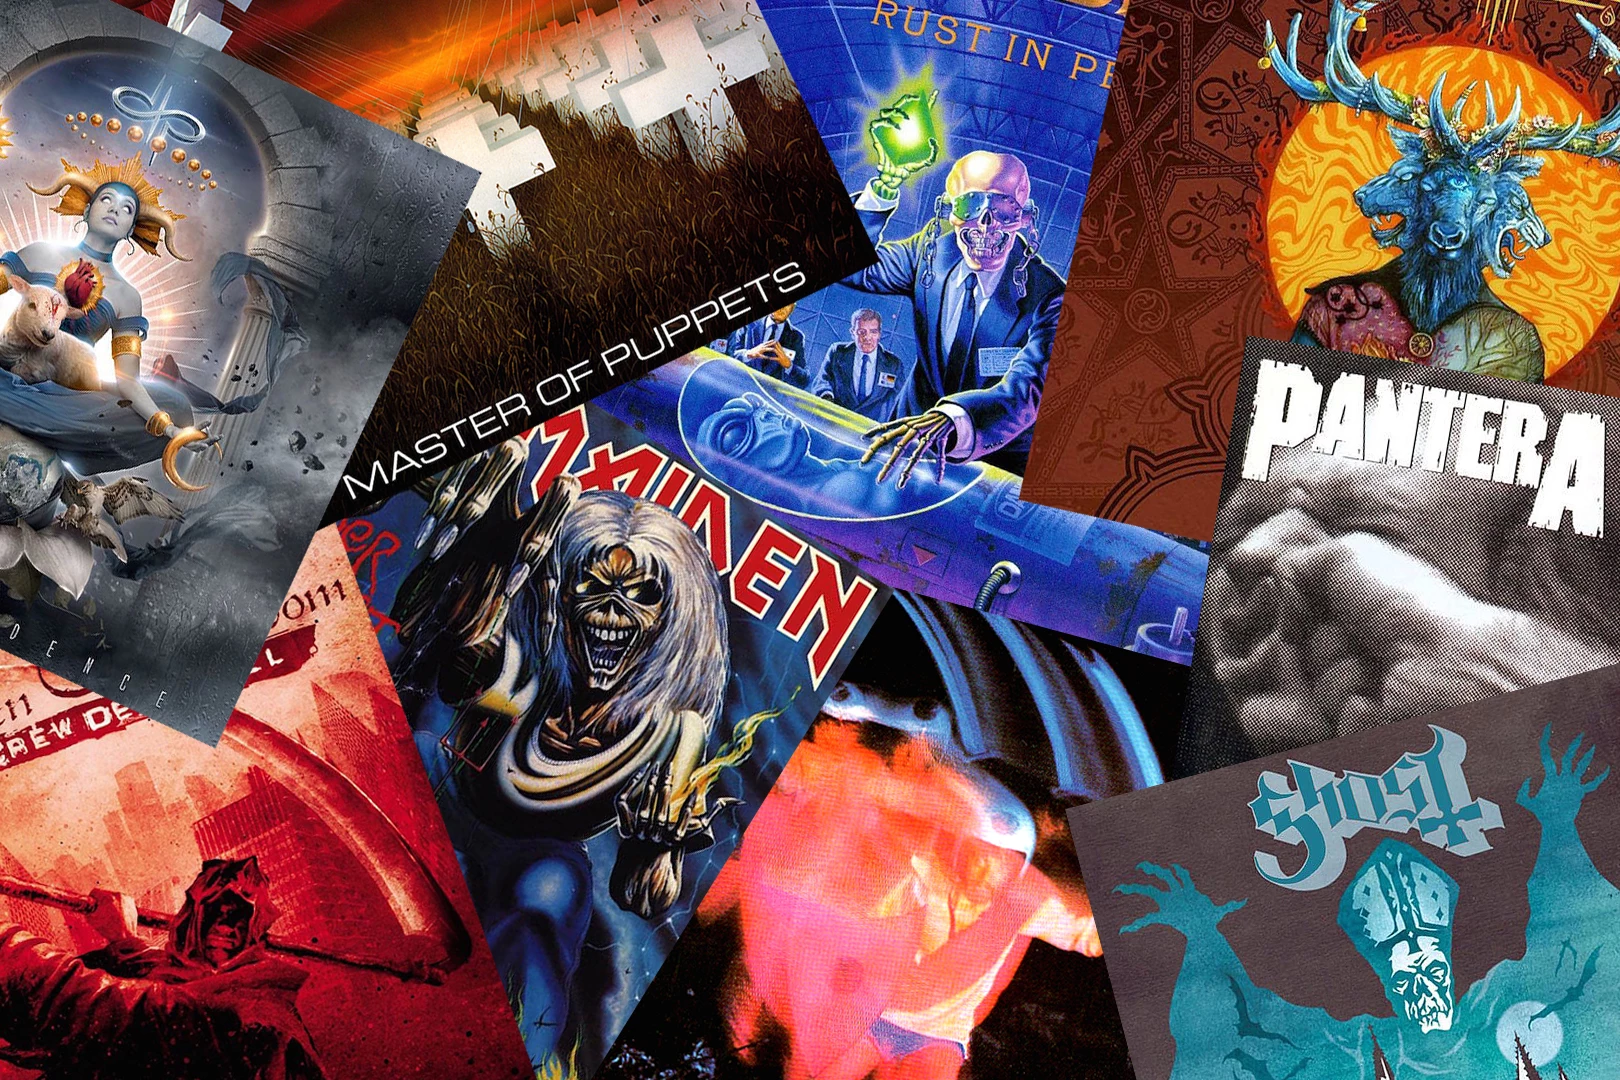 The Best Metal Album of Each Year Since 1970